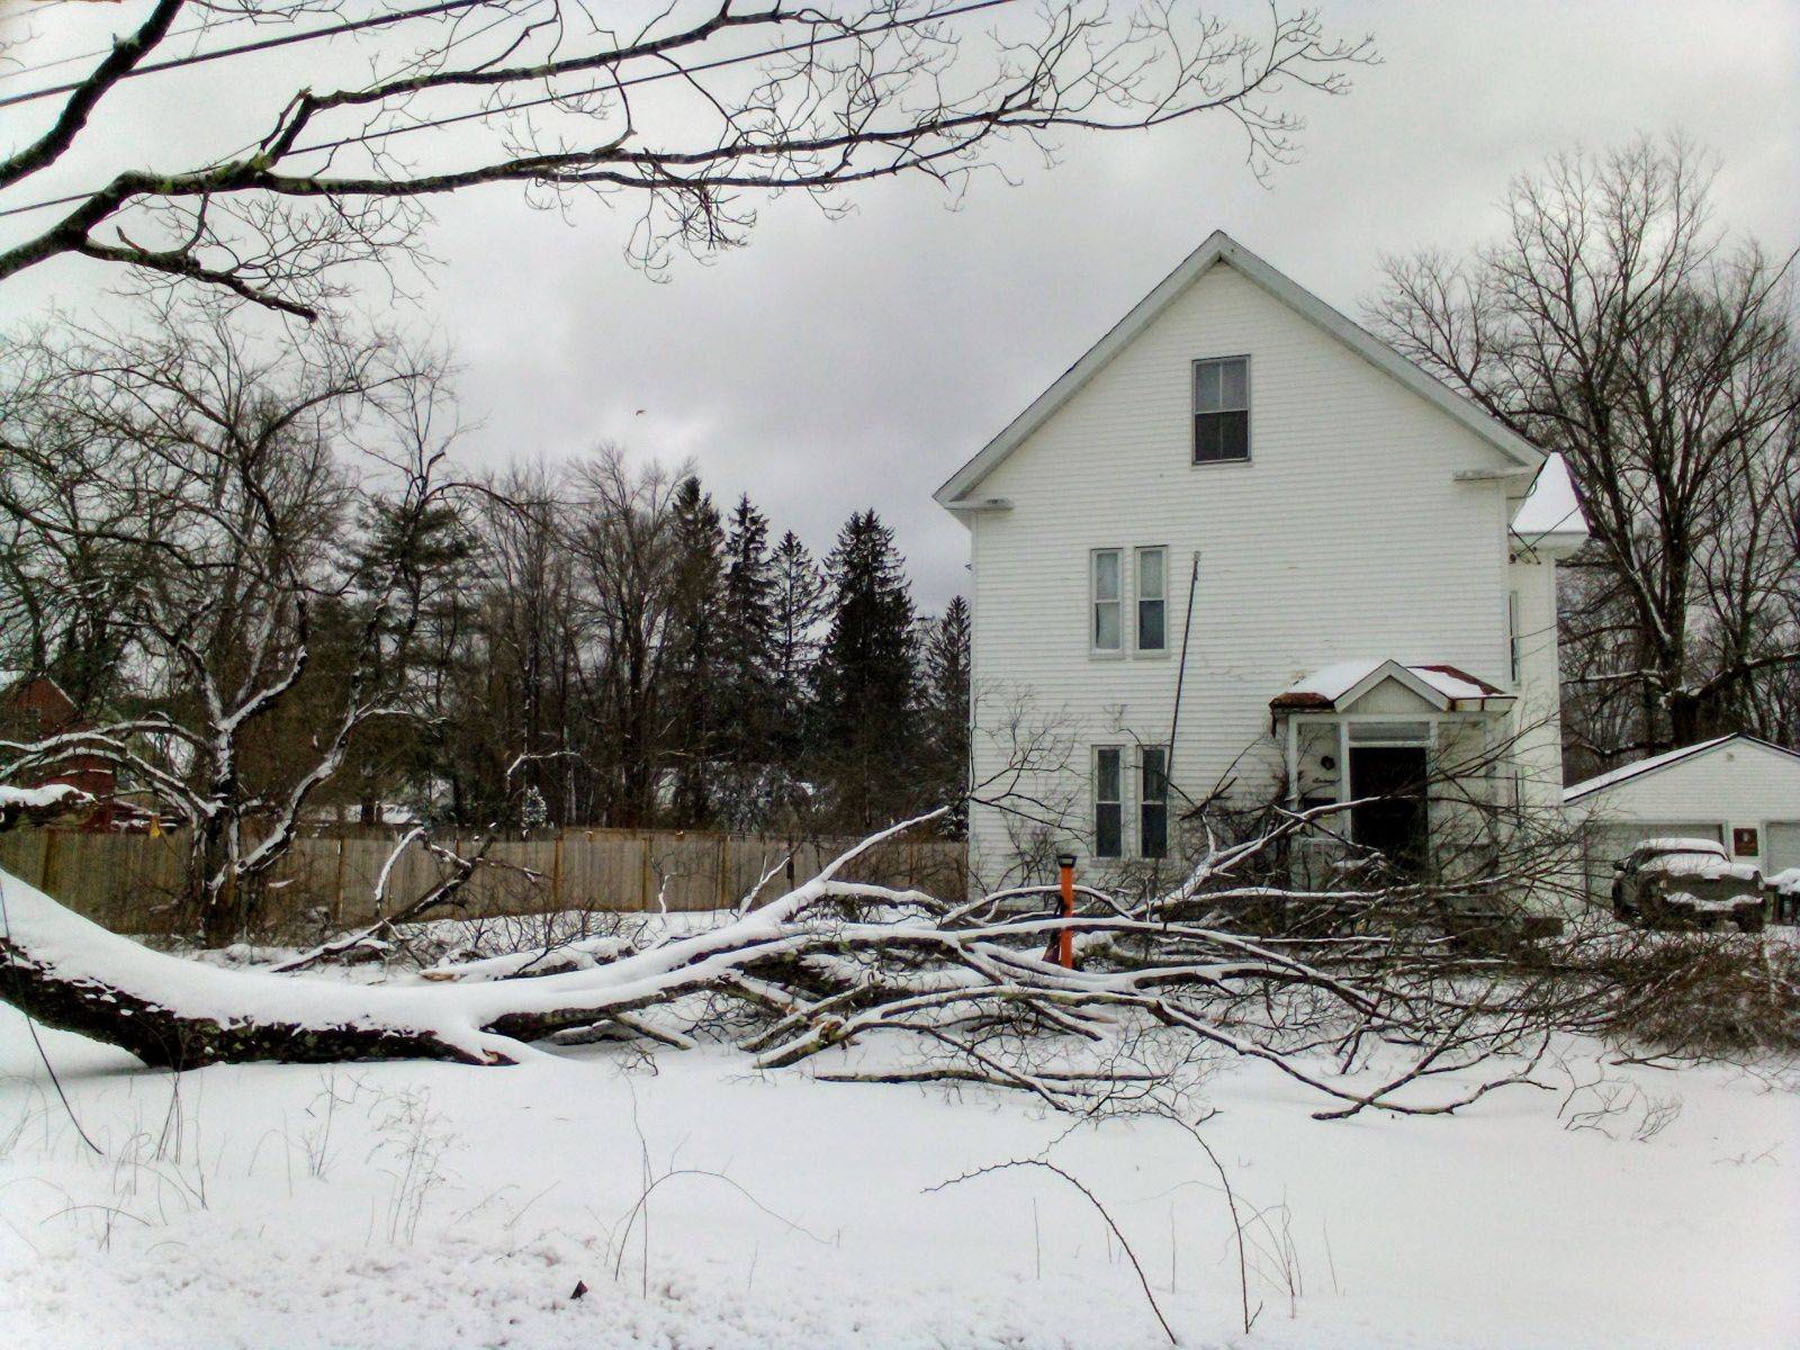 Tree down in April 4 storm